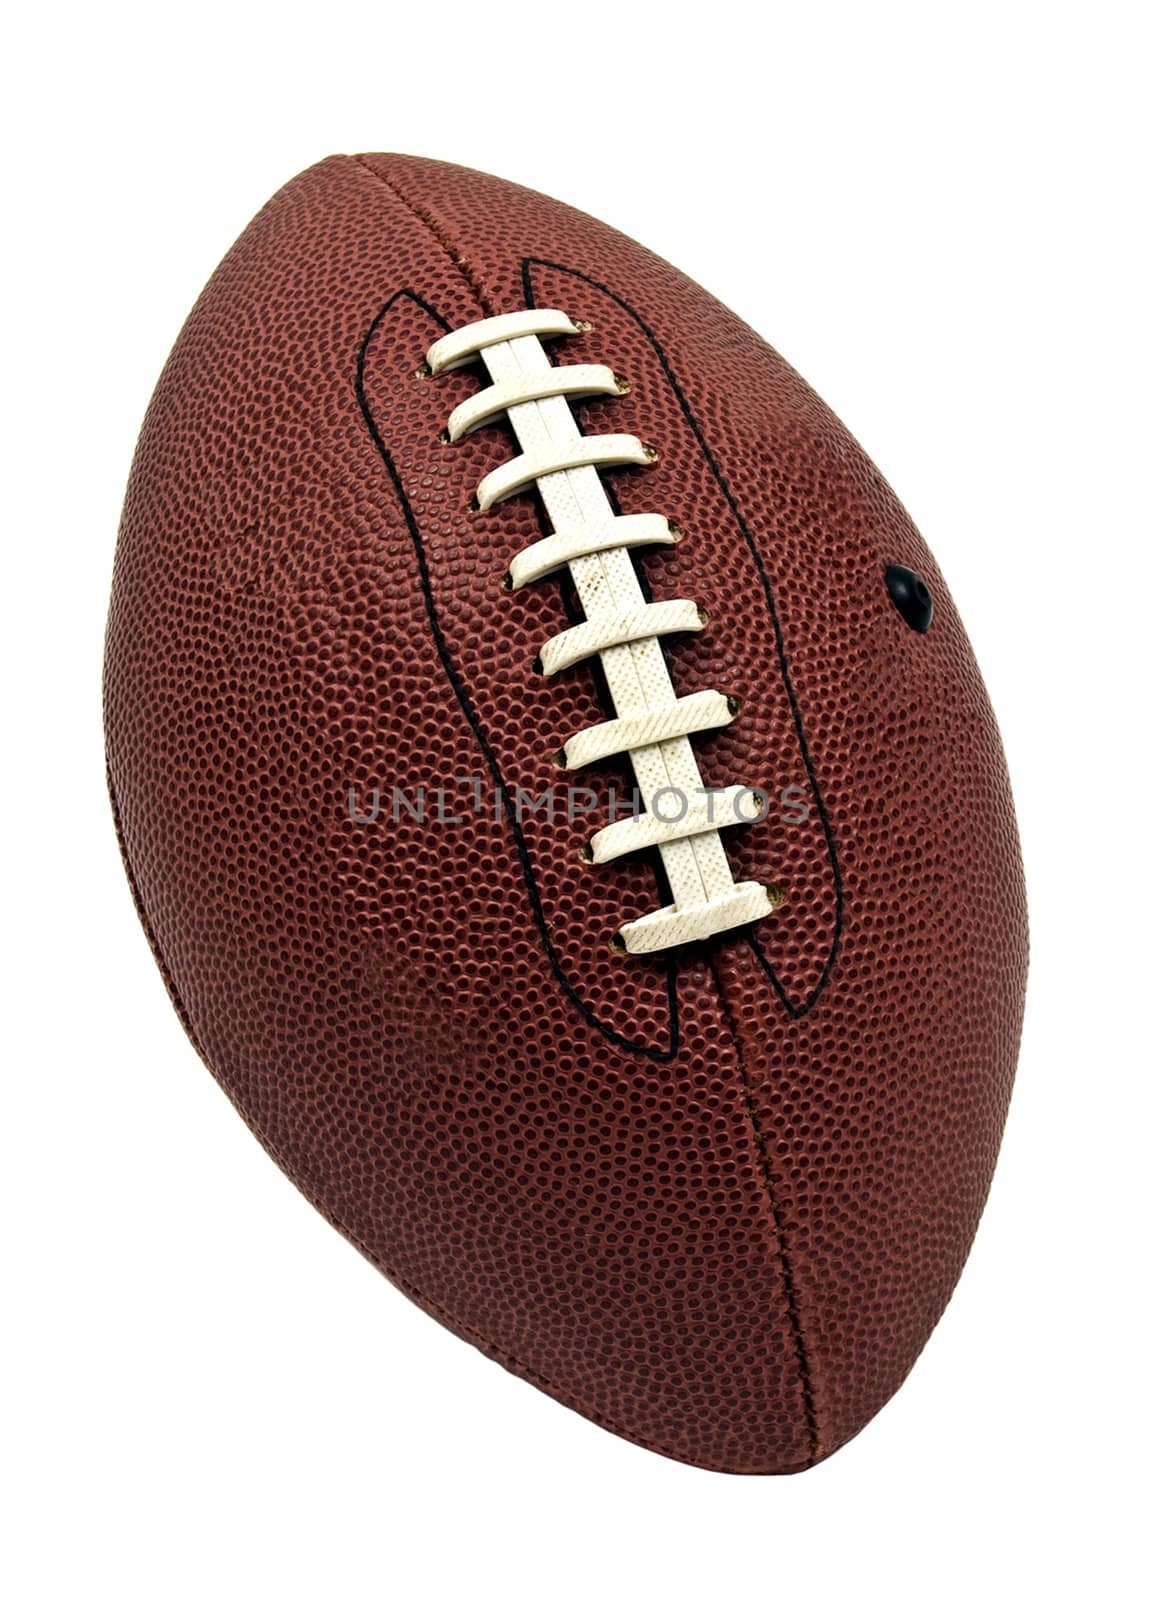 Vertical close up shot of an american football isolated on white background